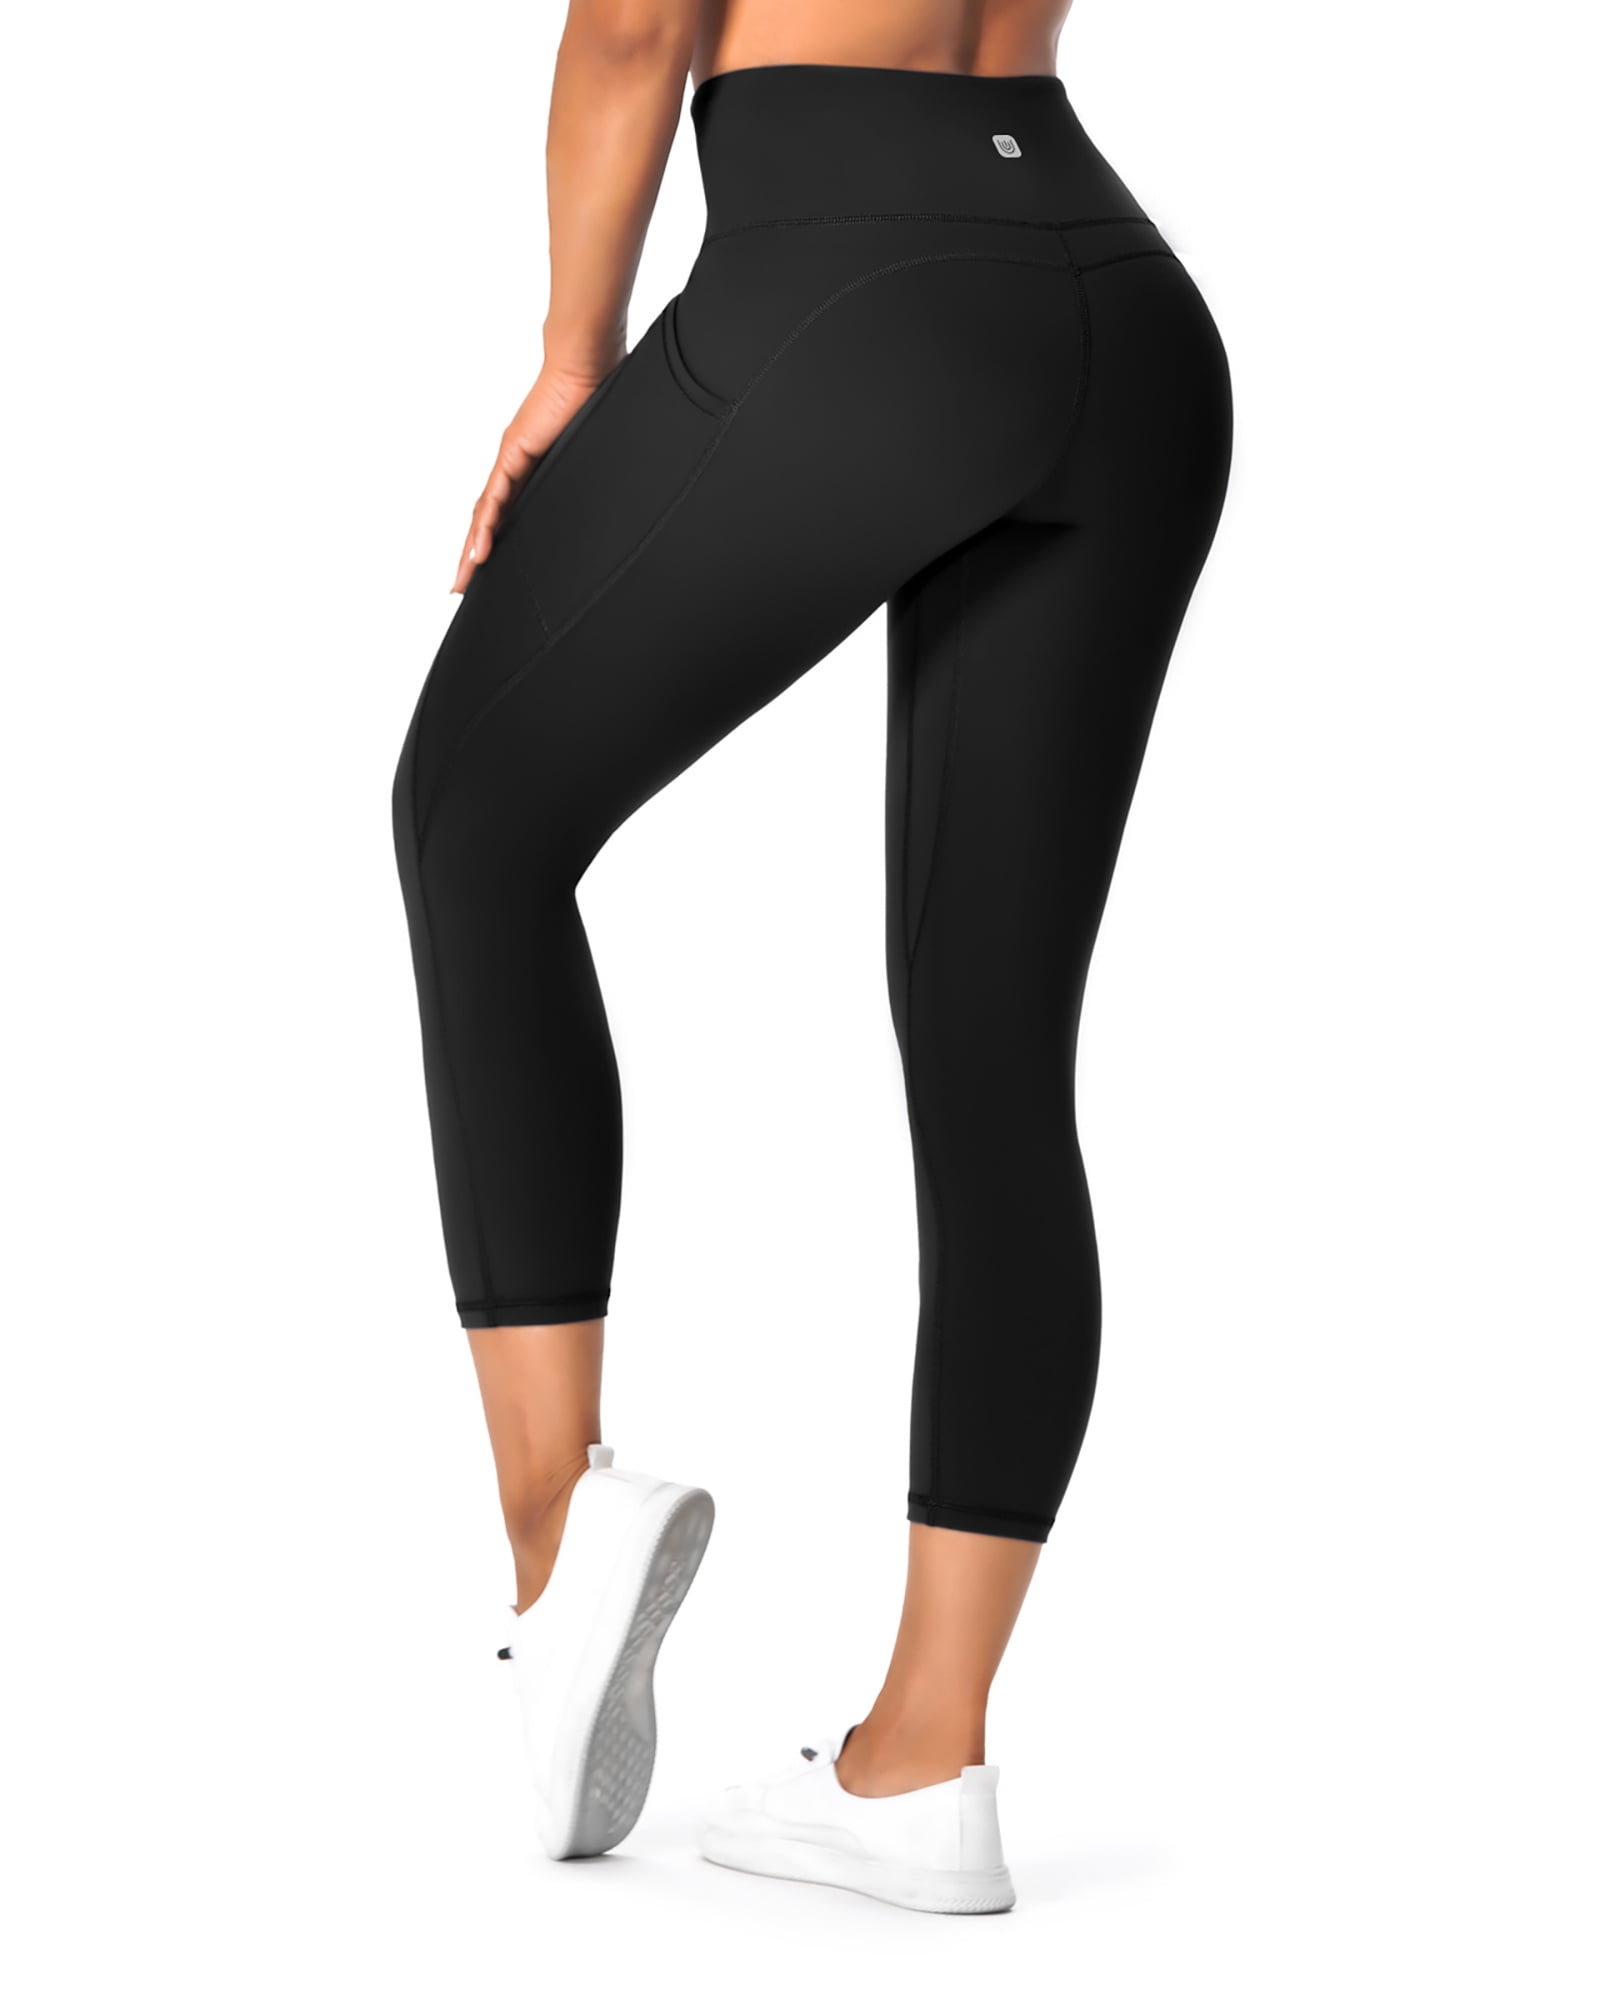 UUE 21 Inseam Olive Workout Leggings for Women,Yoga Capris with Pockets  Tummy Control, Butt Lifting Leggings for women workout 